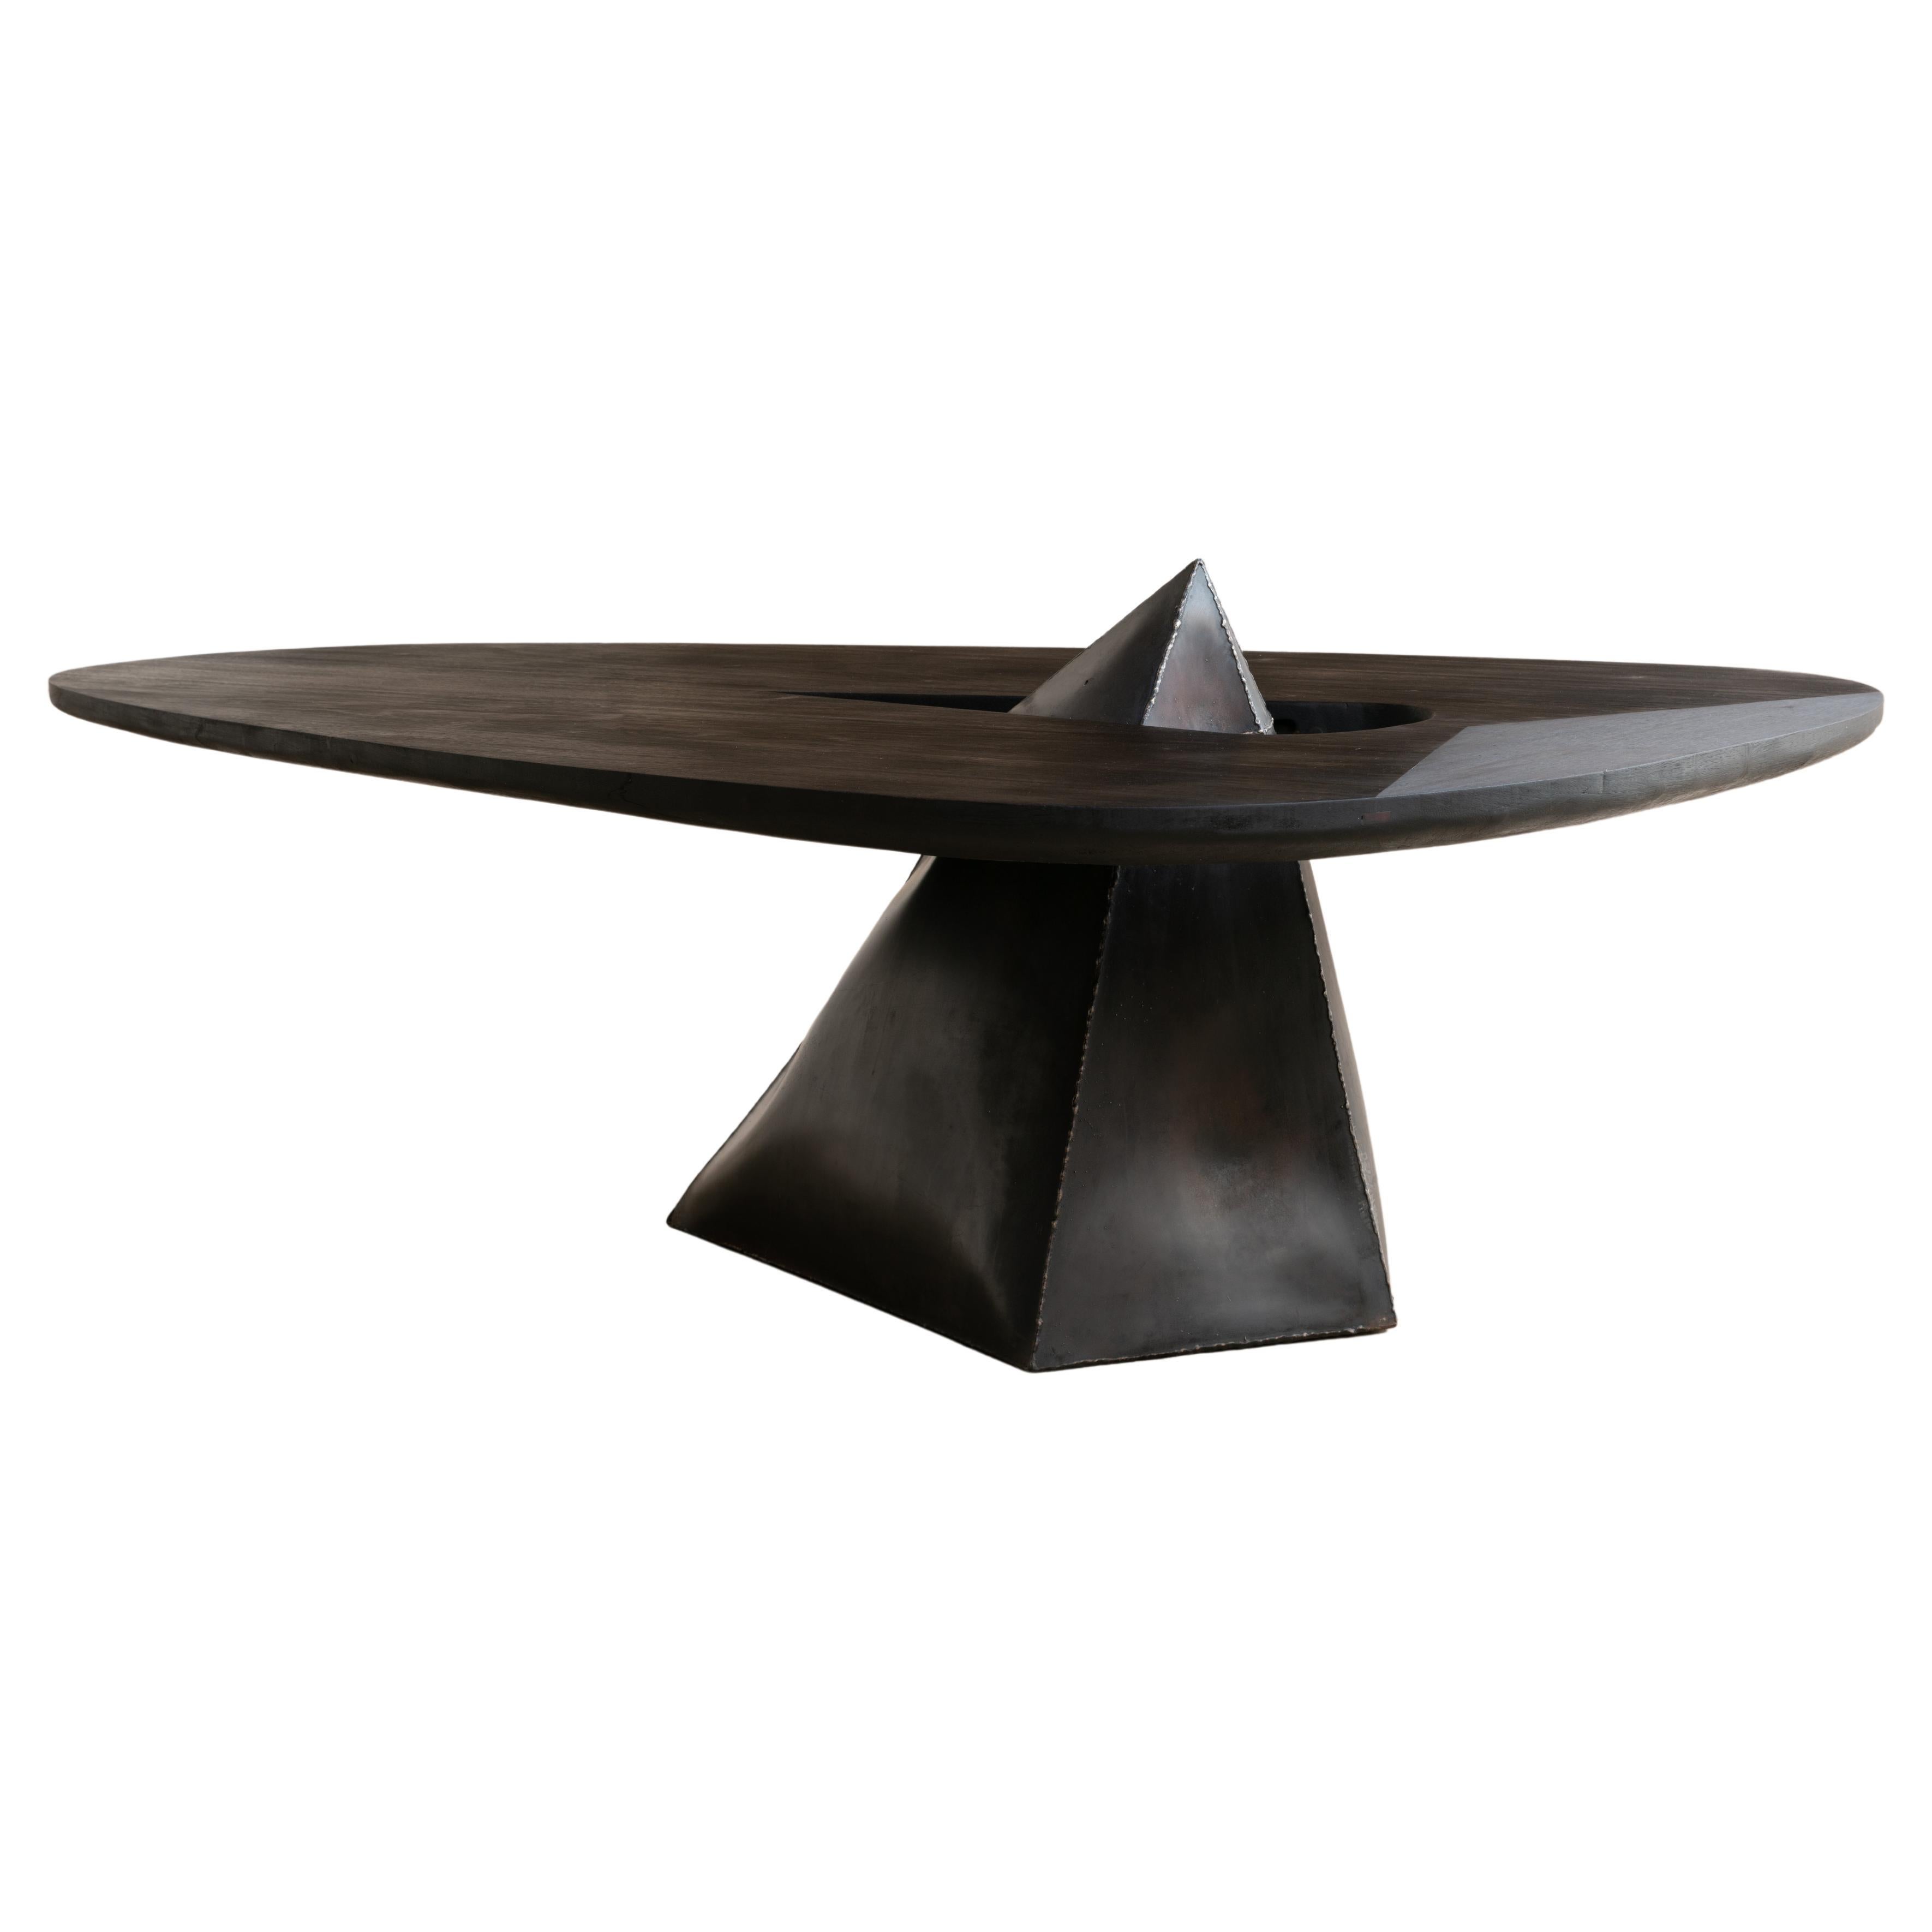 Contemporary with dynamite exploded 'Lose control' Dining table by Mircea Anghel